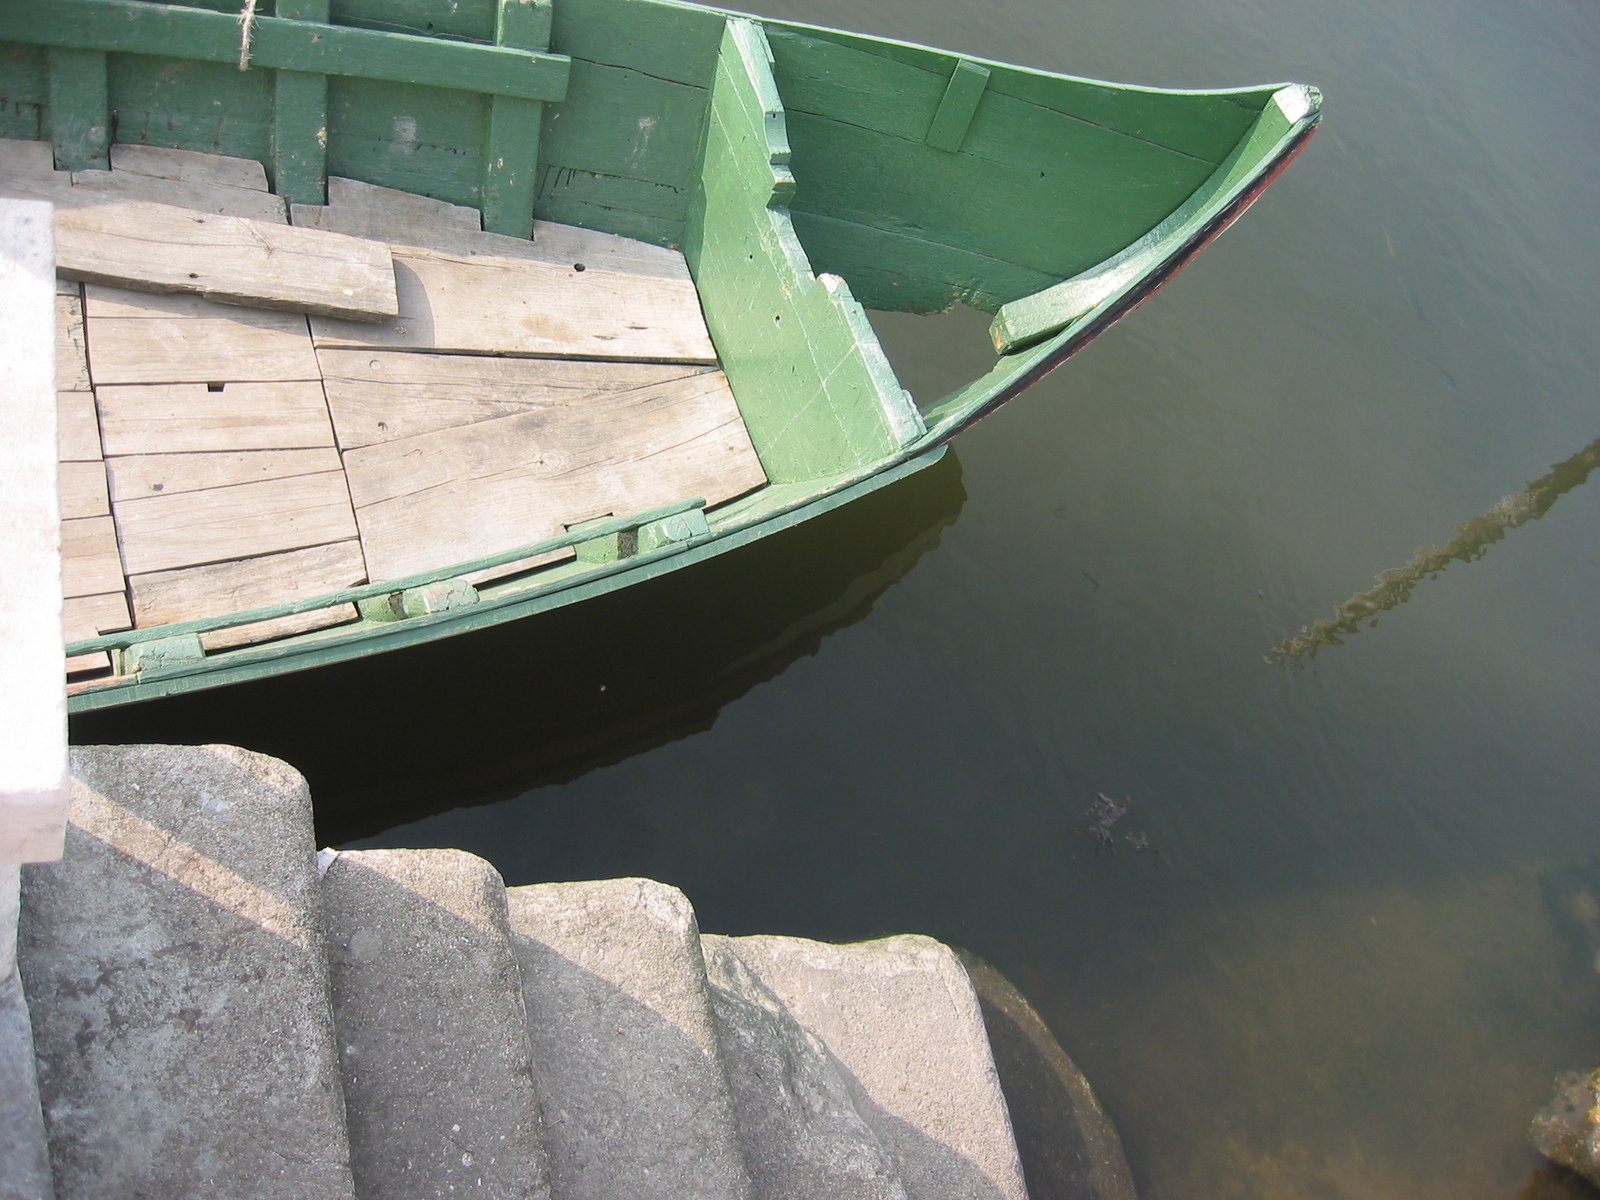 a small green boat on water next to concrete steps